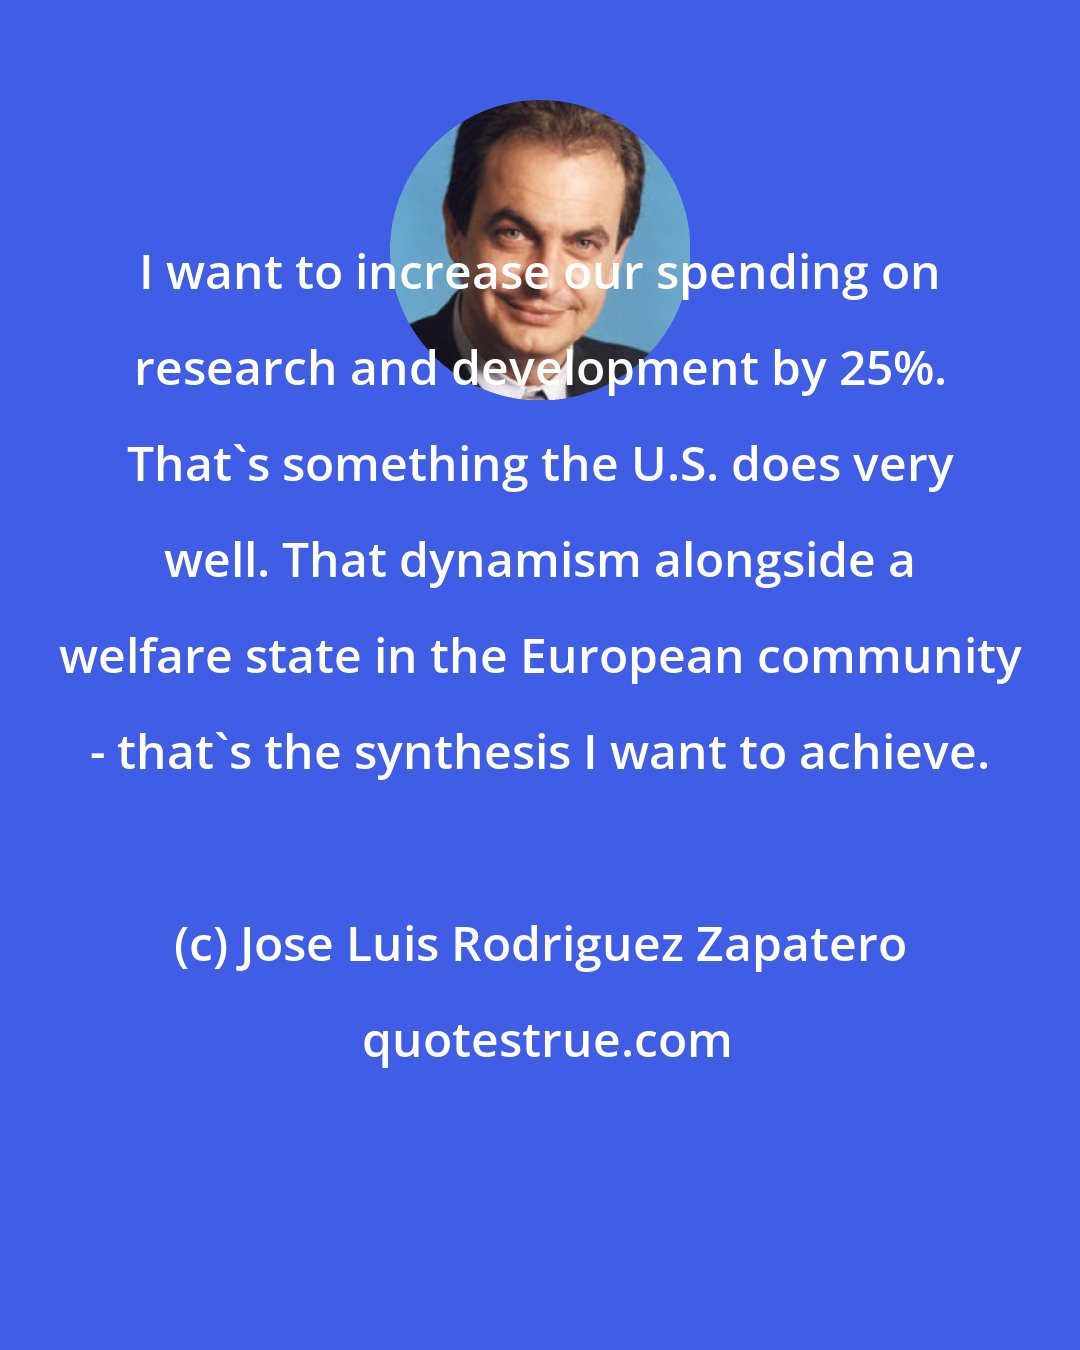 Jose Luis Rodriguez Zapatero: I want to increase our spending on research and development by 25%. That's something the U.S. does very well. That dynamism alongside a welfare state in the European community - that's the synthesis I want to achieve.